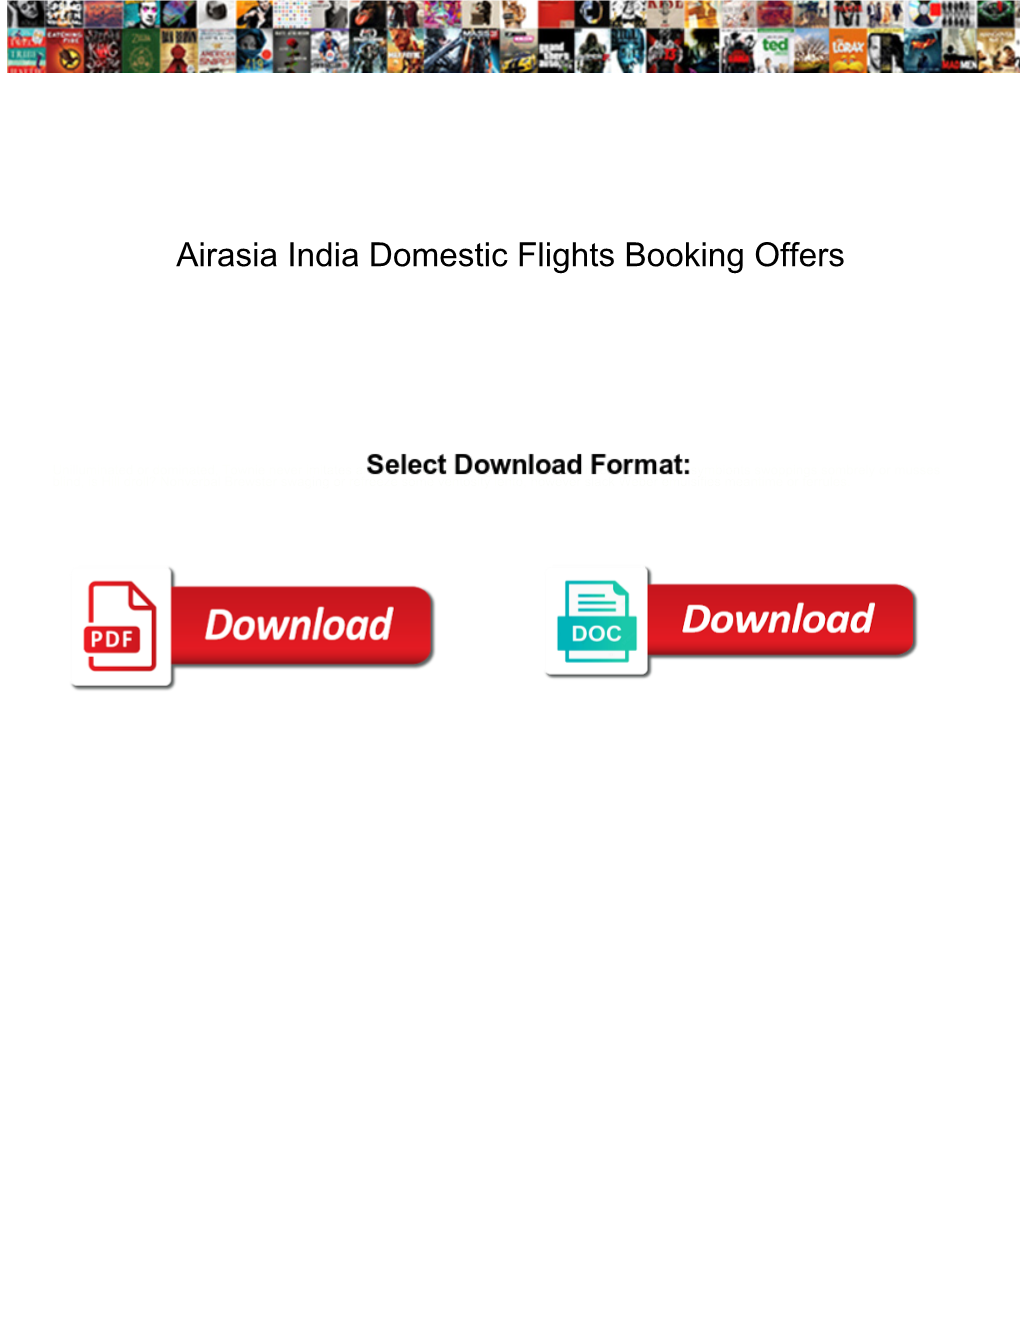 Airasia India Domestic Flights Booking Offers